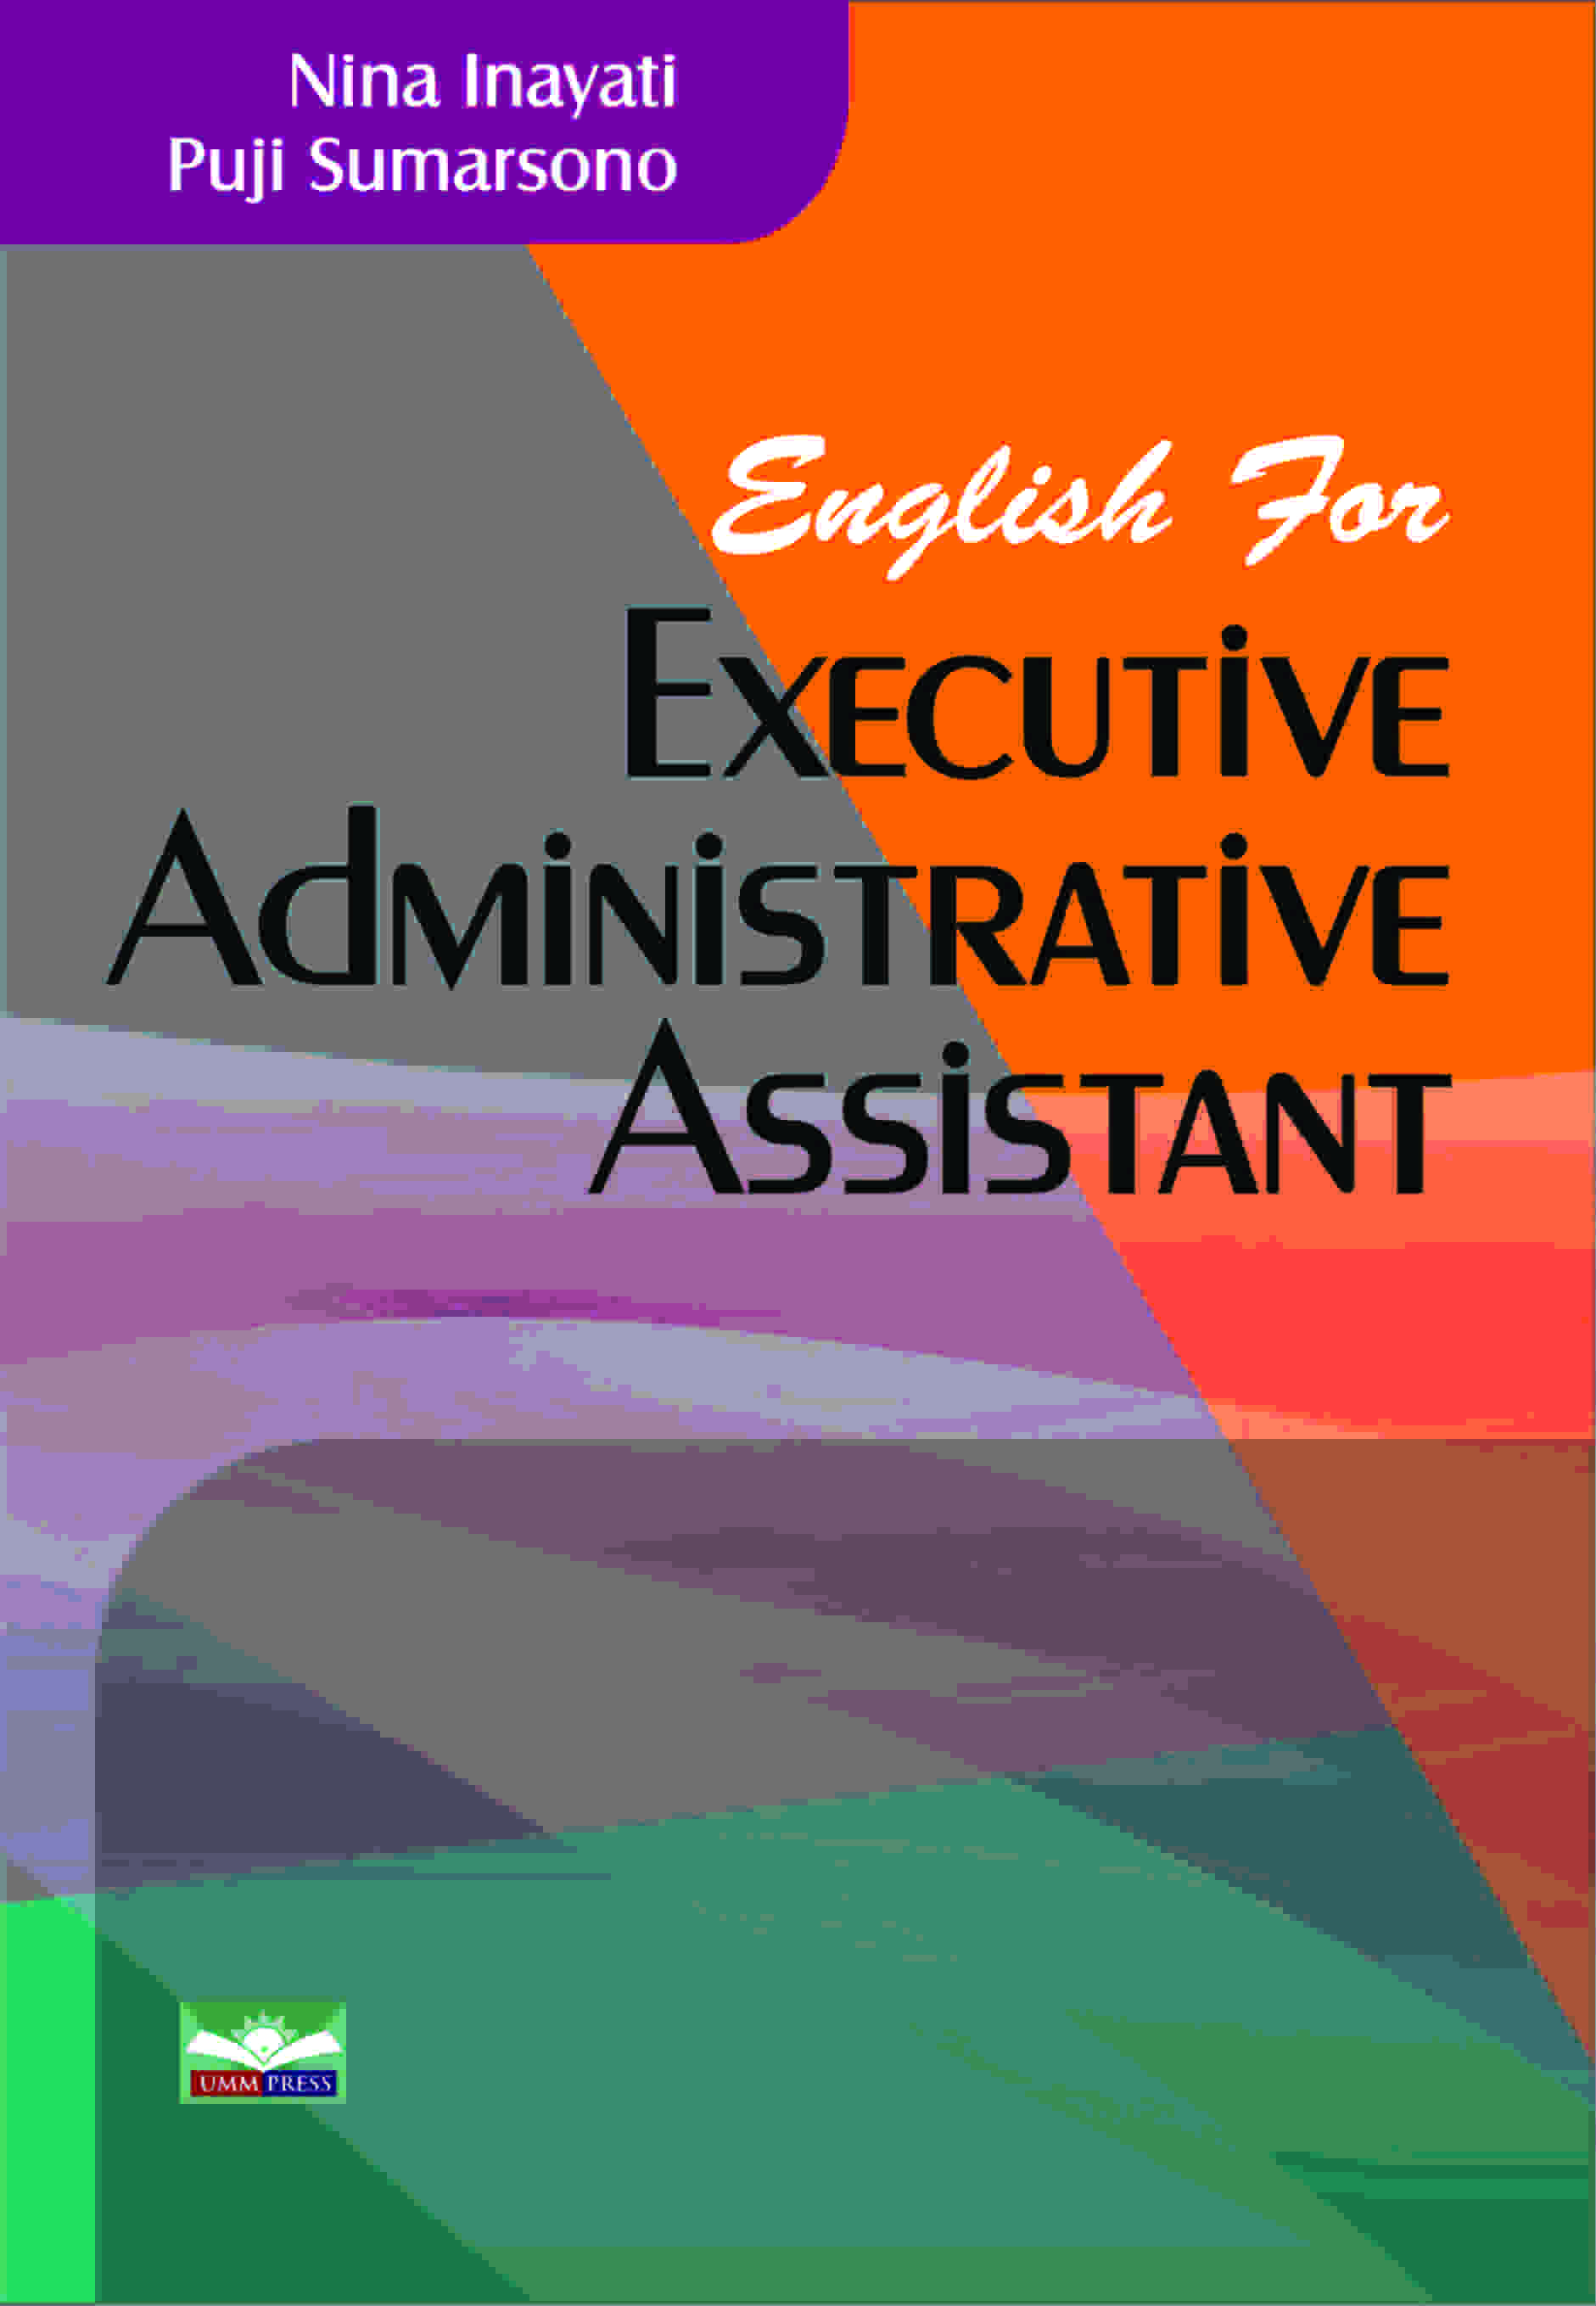 ENGLISH FOR EXECUTIVE ADMINISTRATIVE ASSISTANT